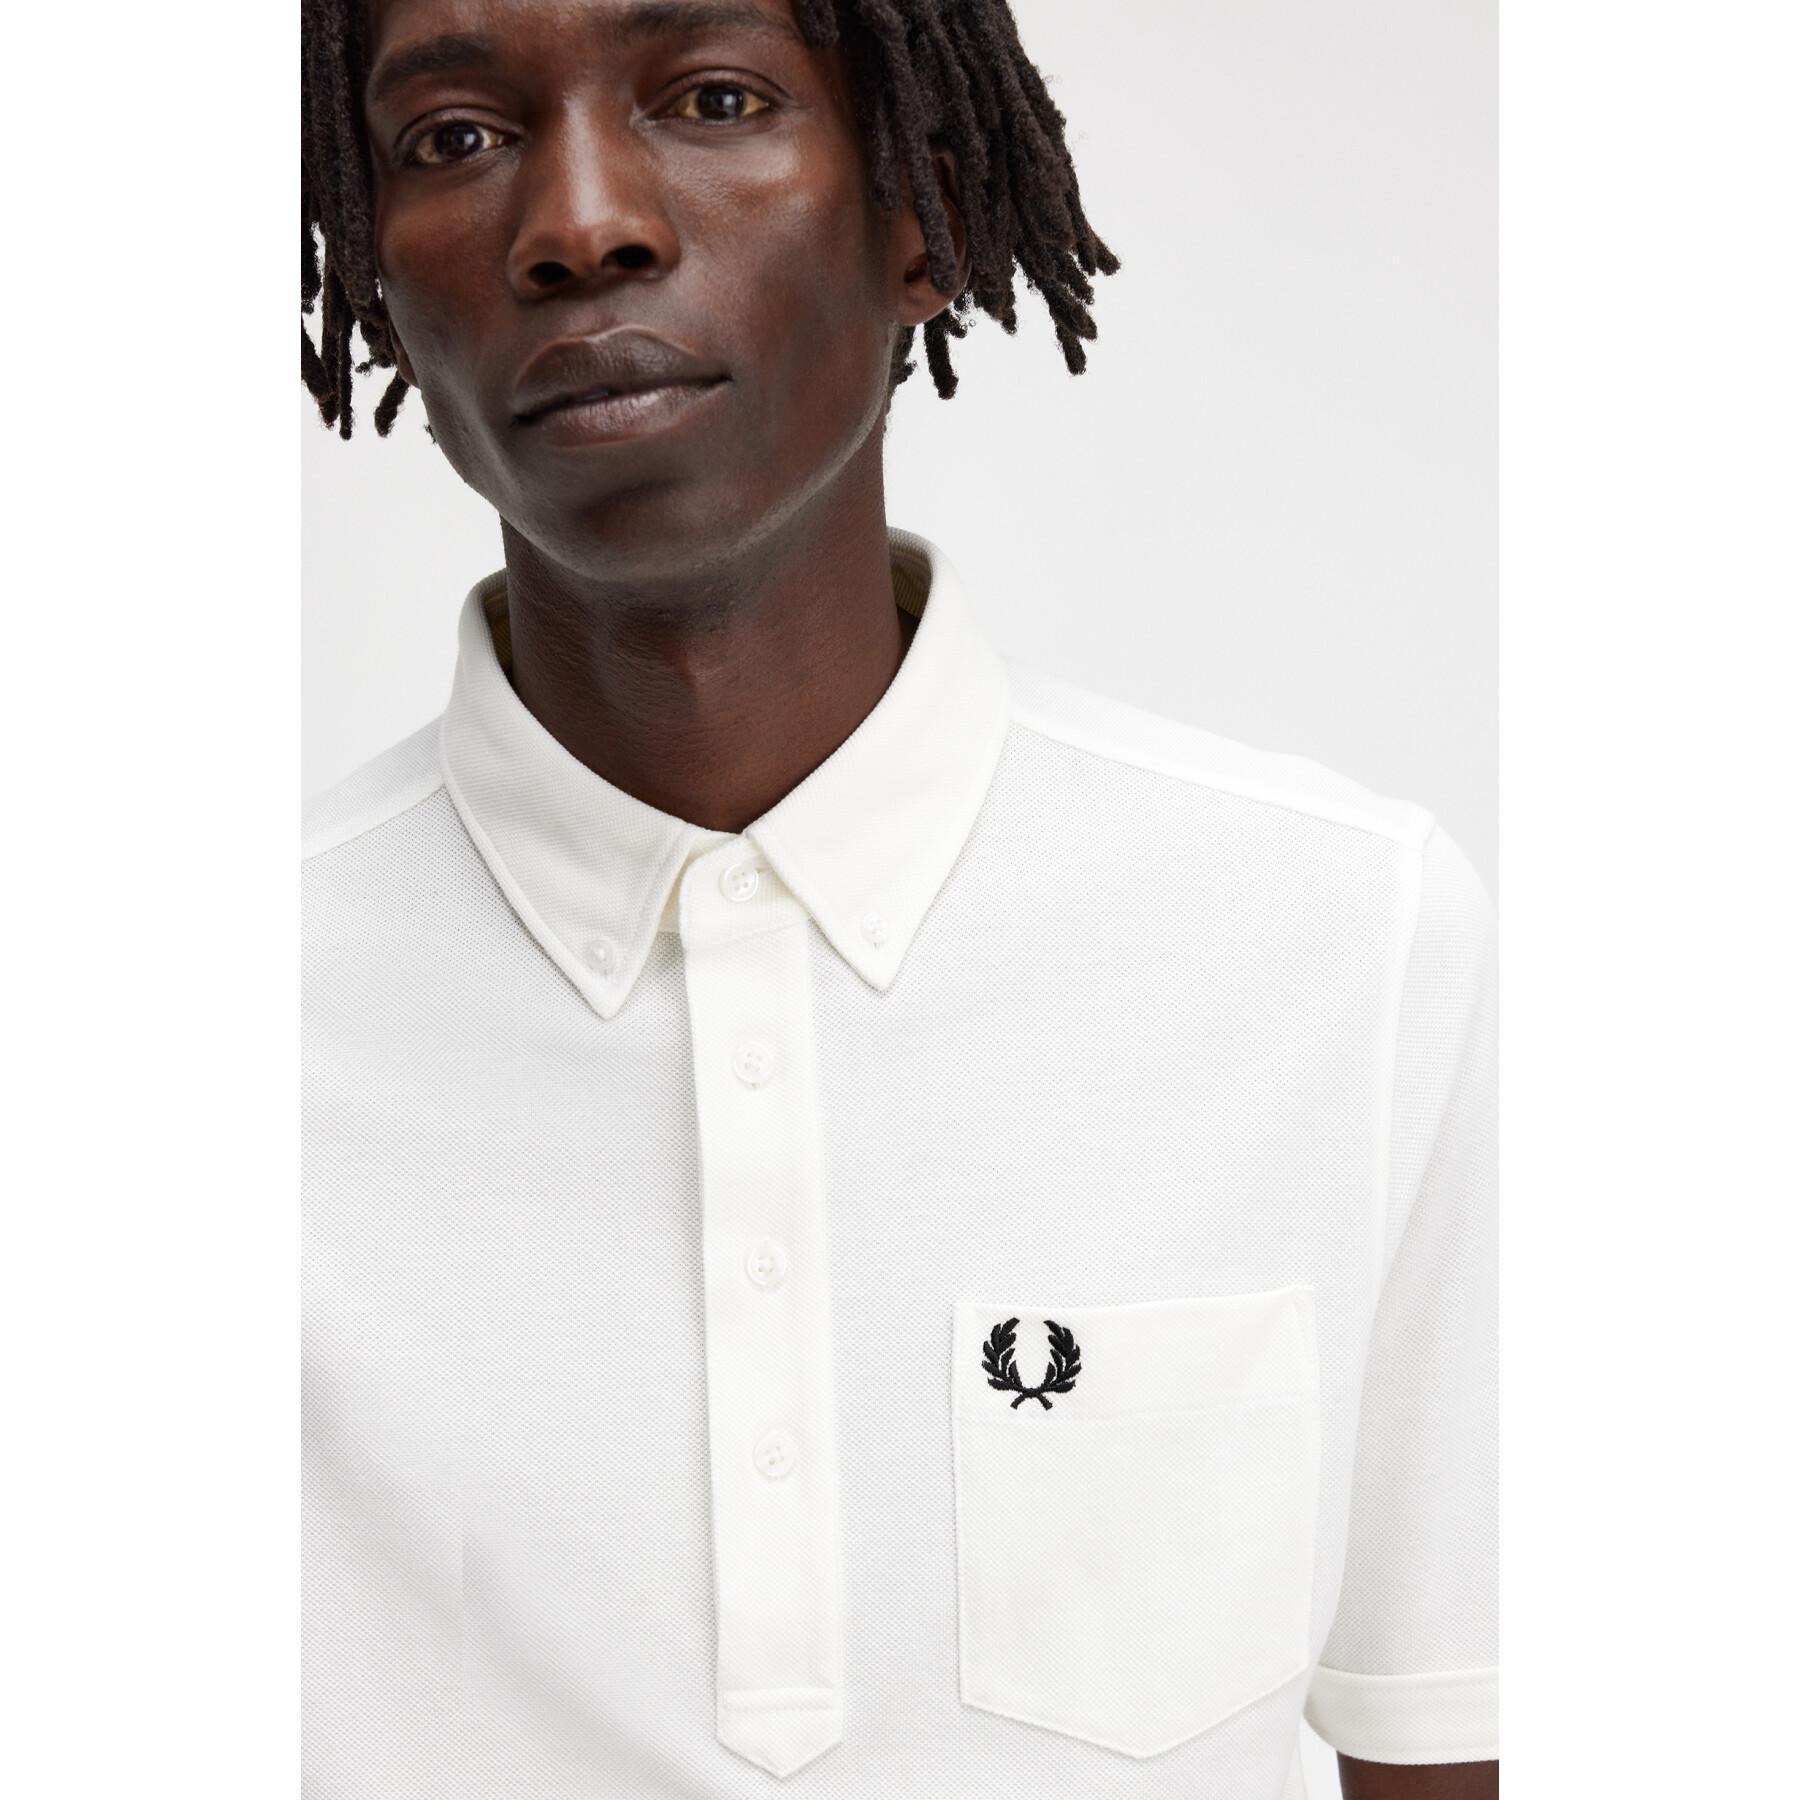 Polo-Shirt mit Button-Down-Kragen Fred Perry